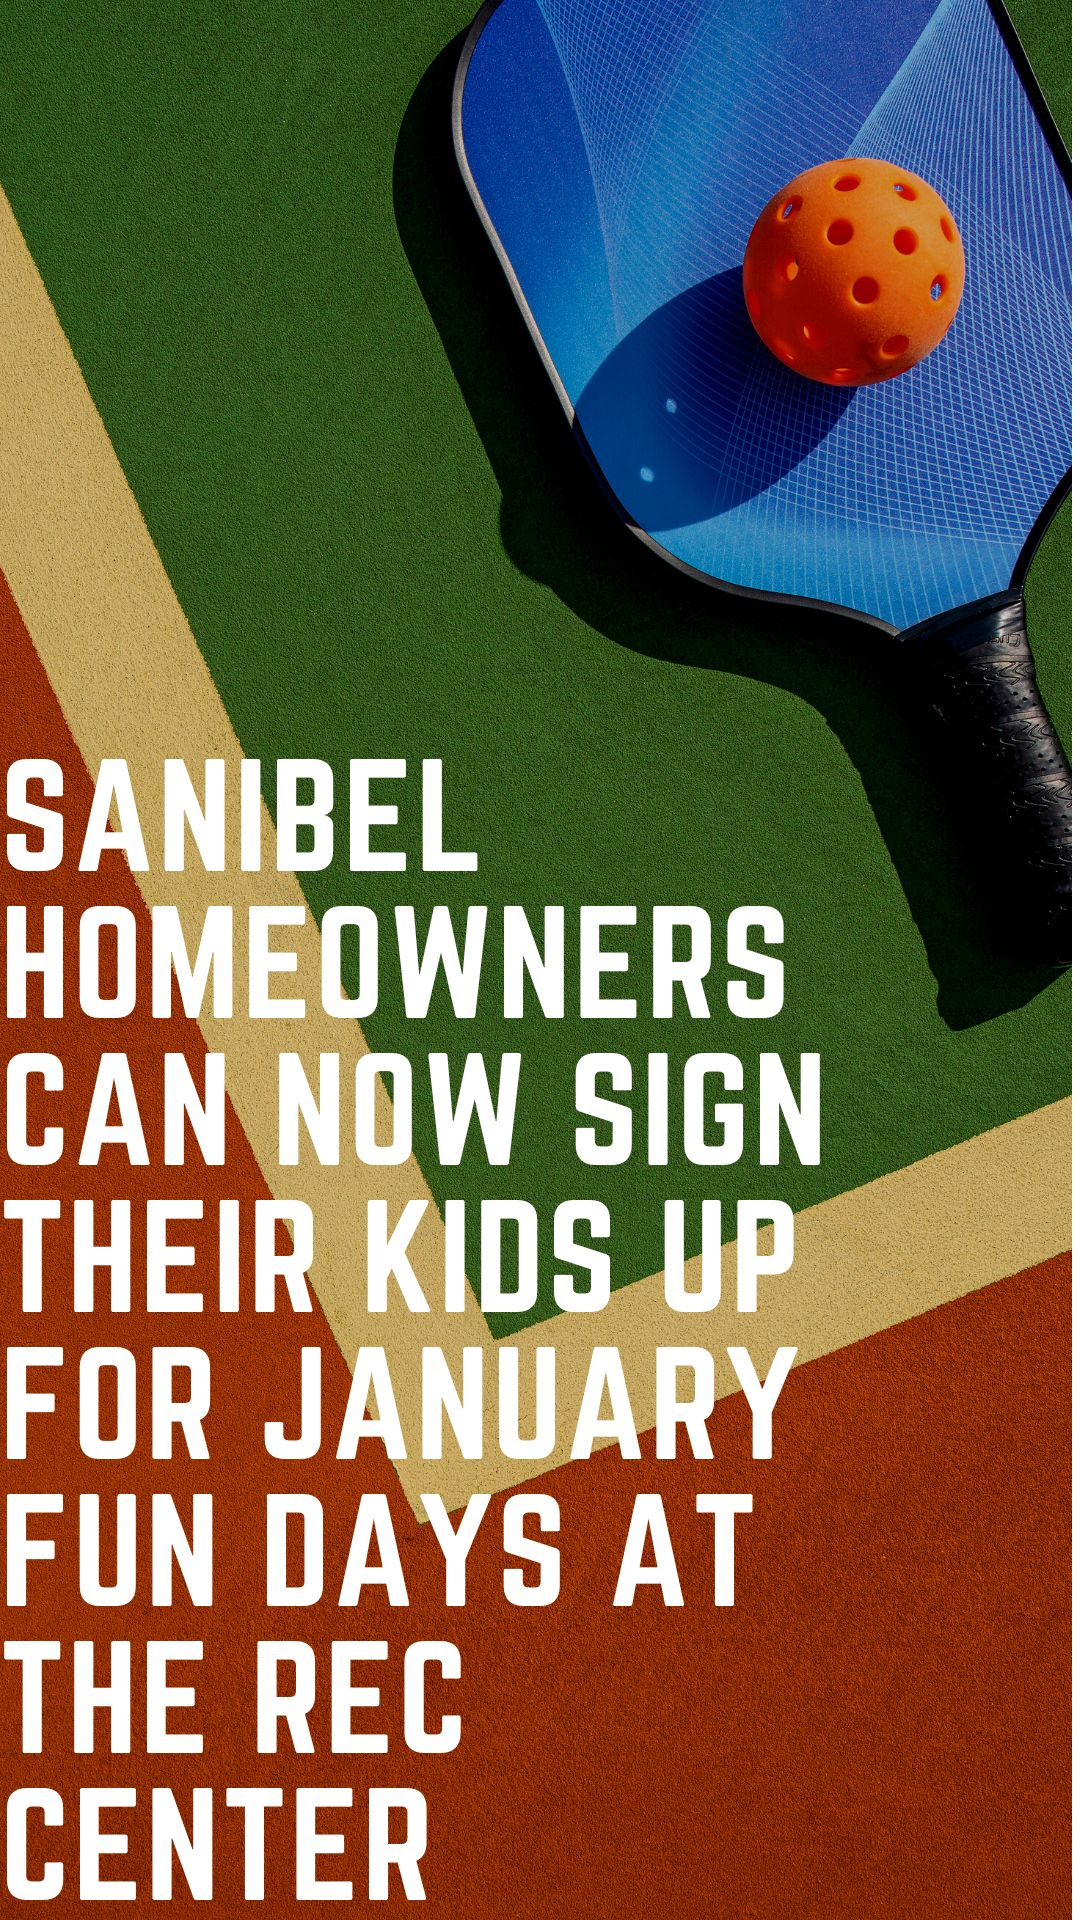 Sanibel Homeowners can Now Sign Their Kids Up for January Fun Days at the Rec Center